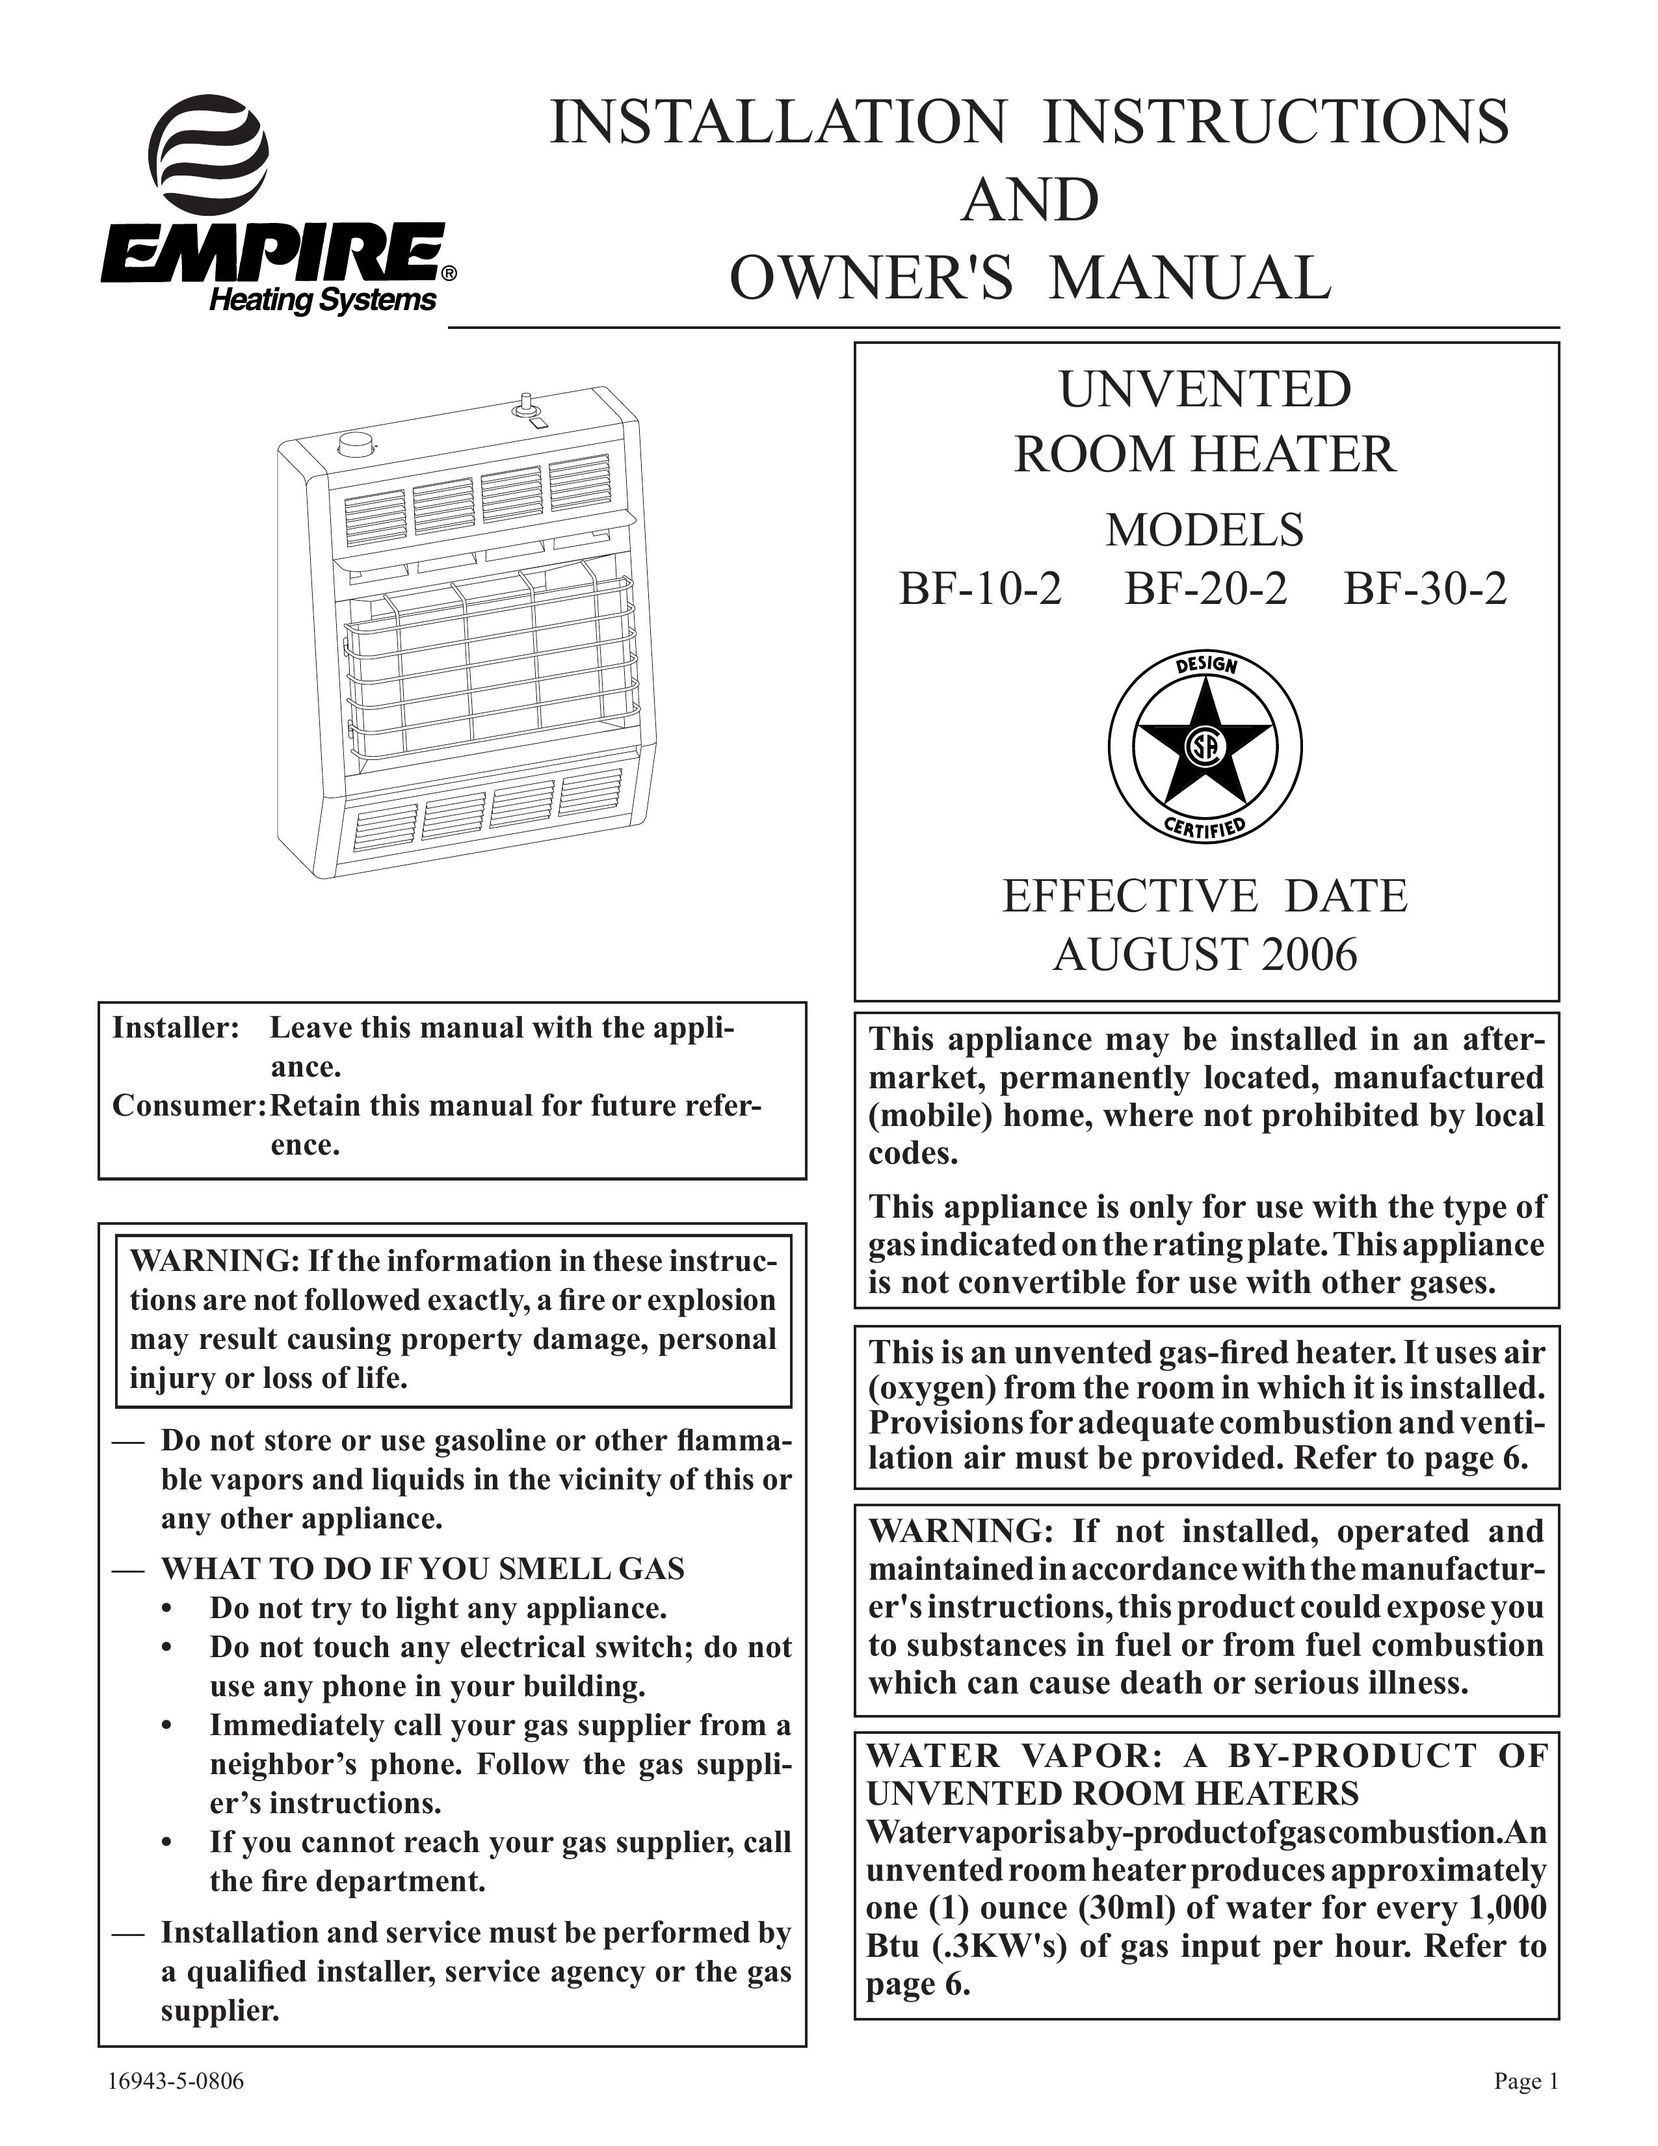 Empire Comfort Systems BF-10-2 Electric Heater User Manual